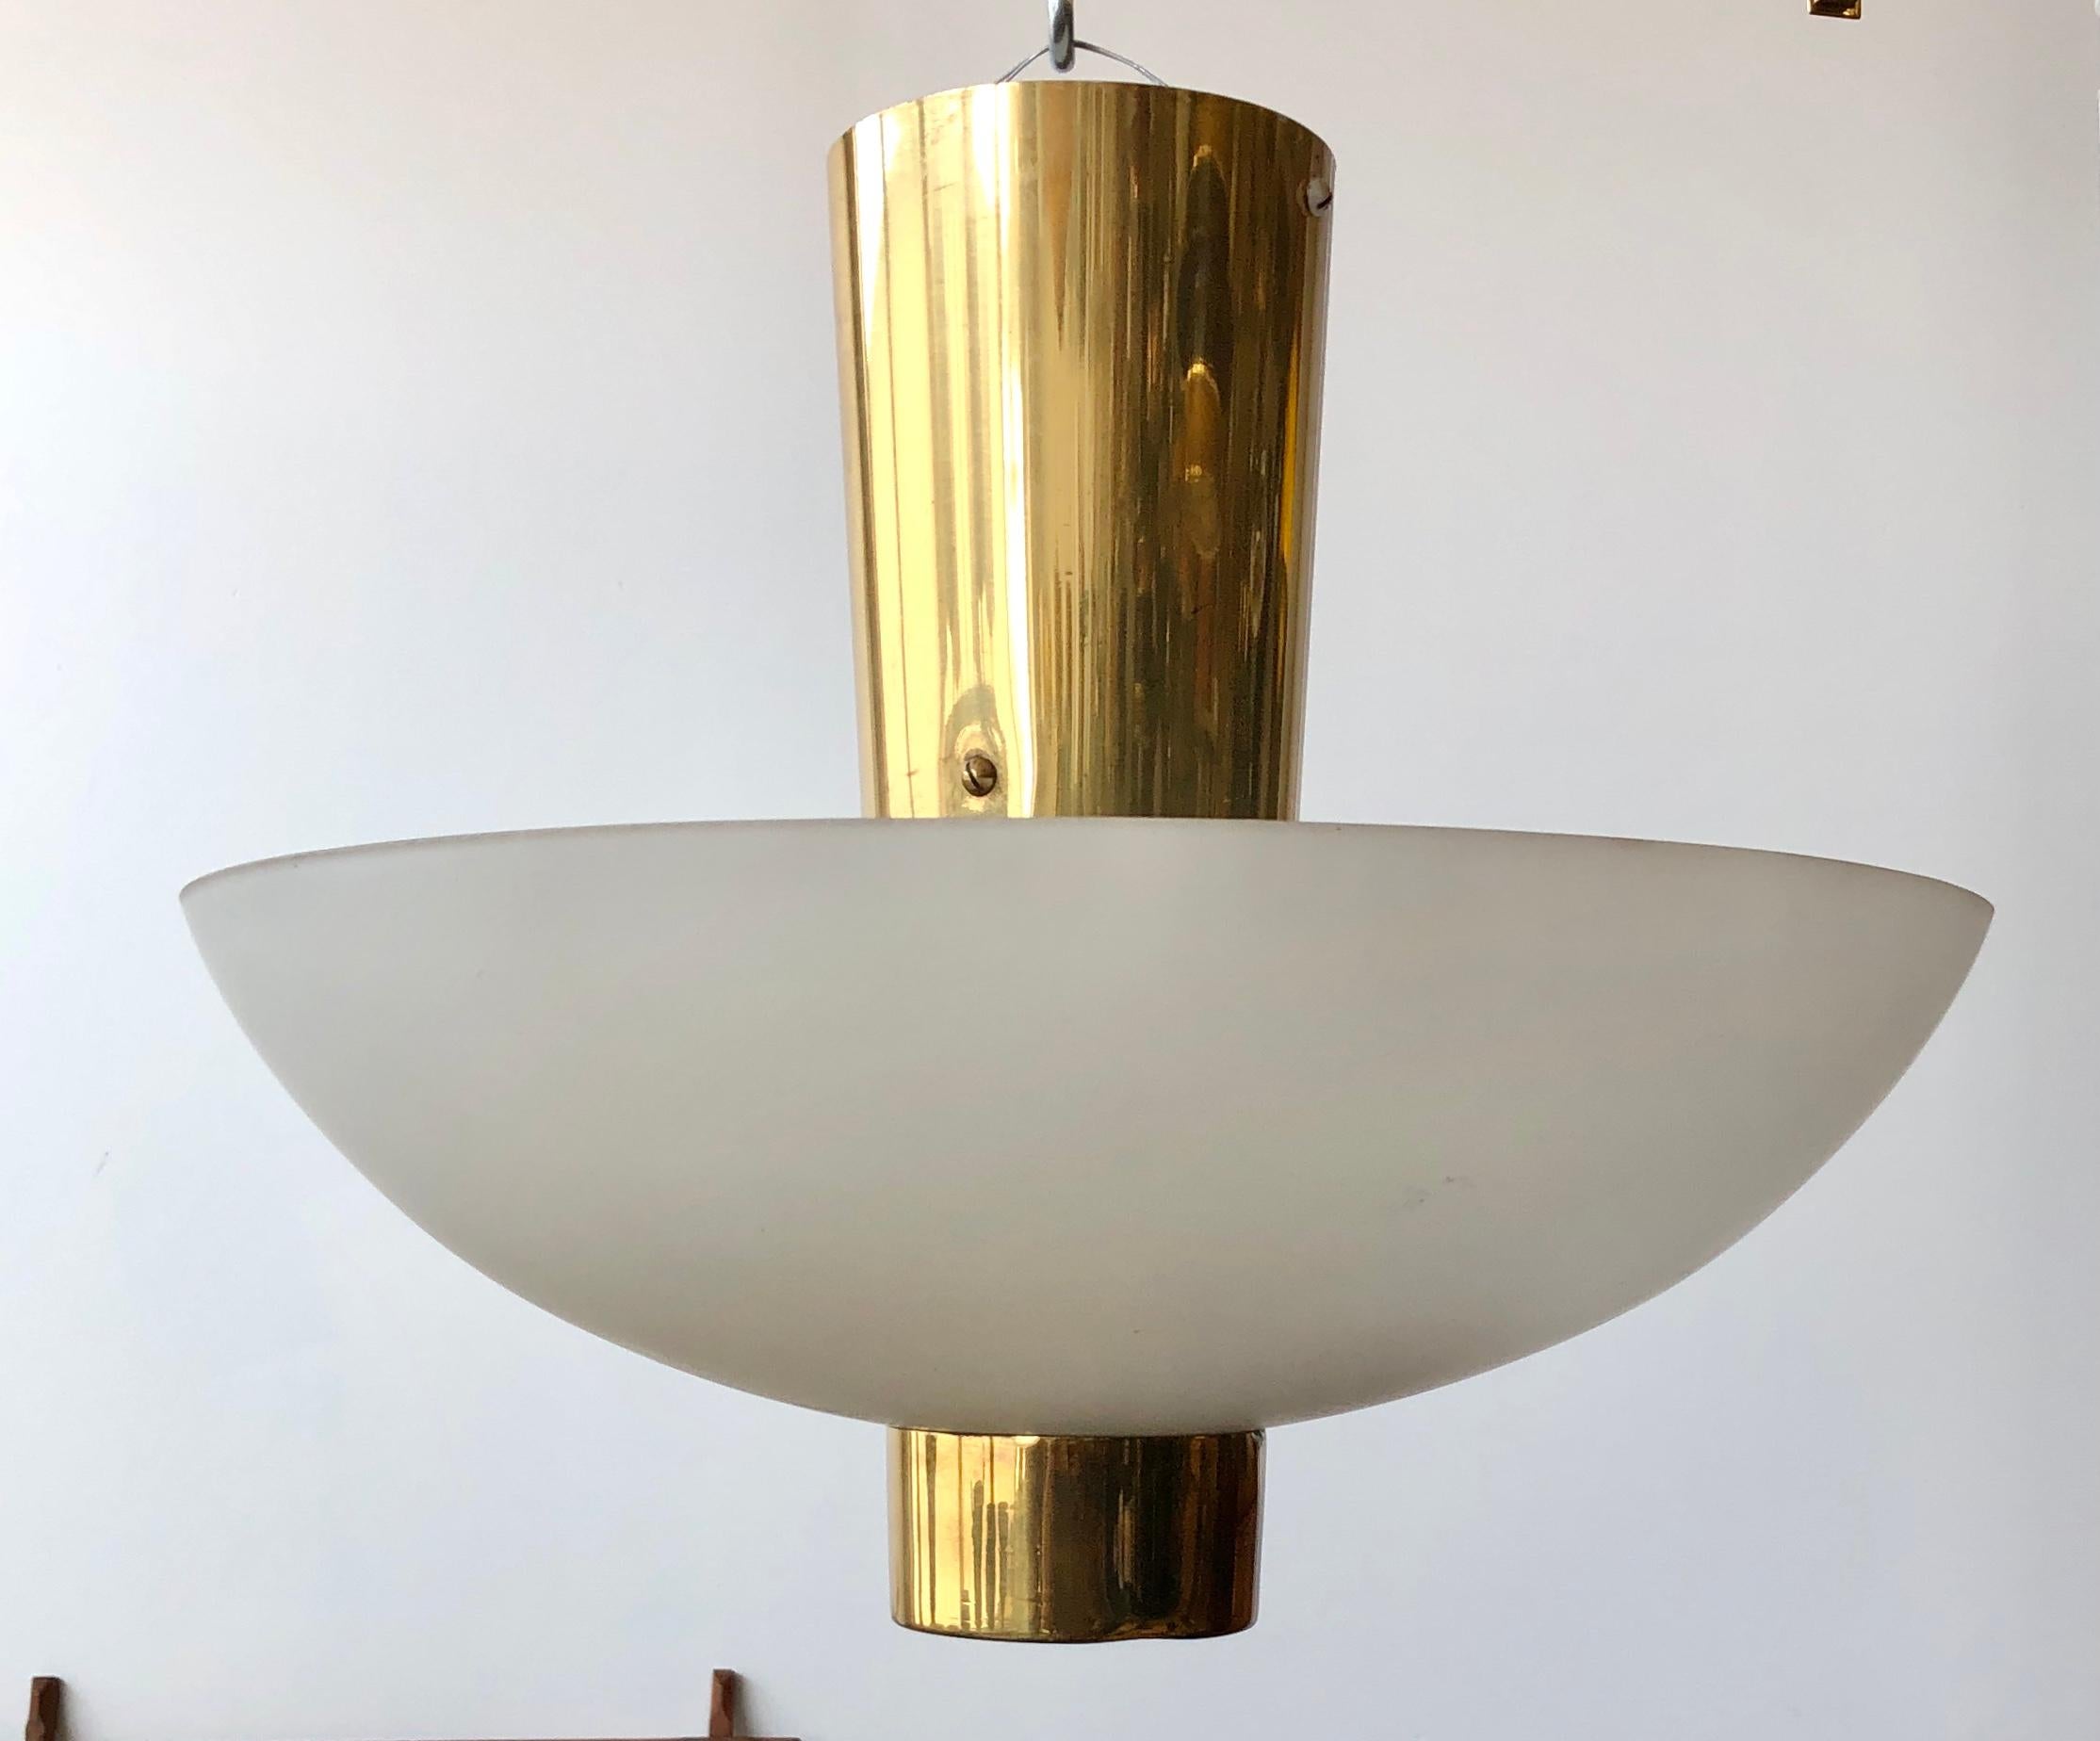 Ceiling light designed by Paavo Tynell for Idman, Finland circa 1950th.
Glass chade on polished brass frame. Four A27 sockets.
Similar example featured on idman catalog #140, Model 9045.
Some dents on bottom brass cup.
Rewiring available upon